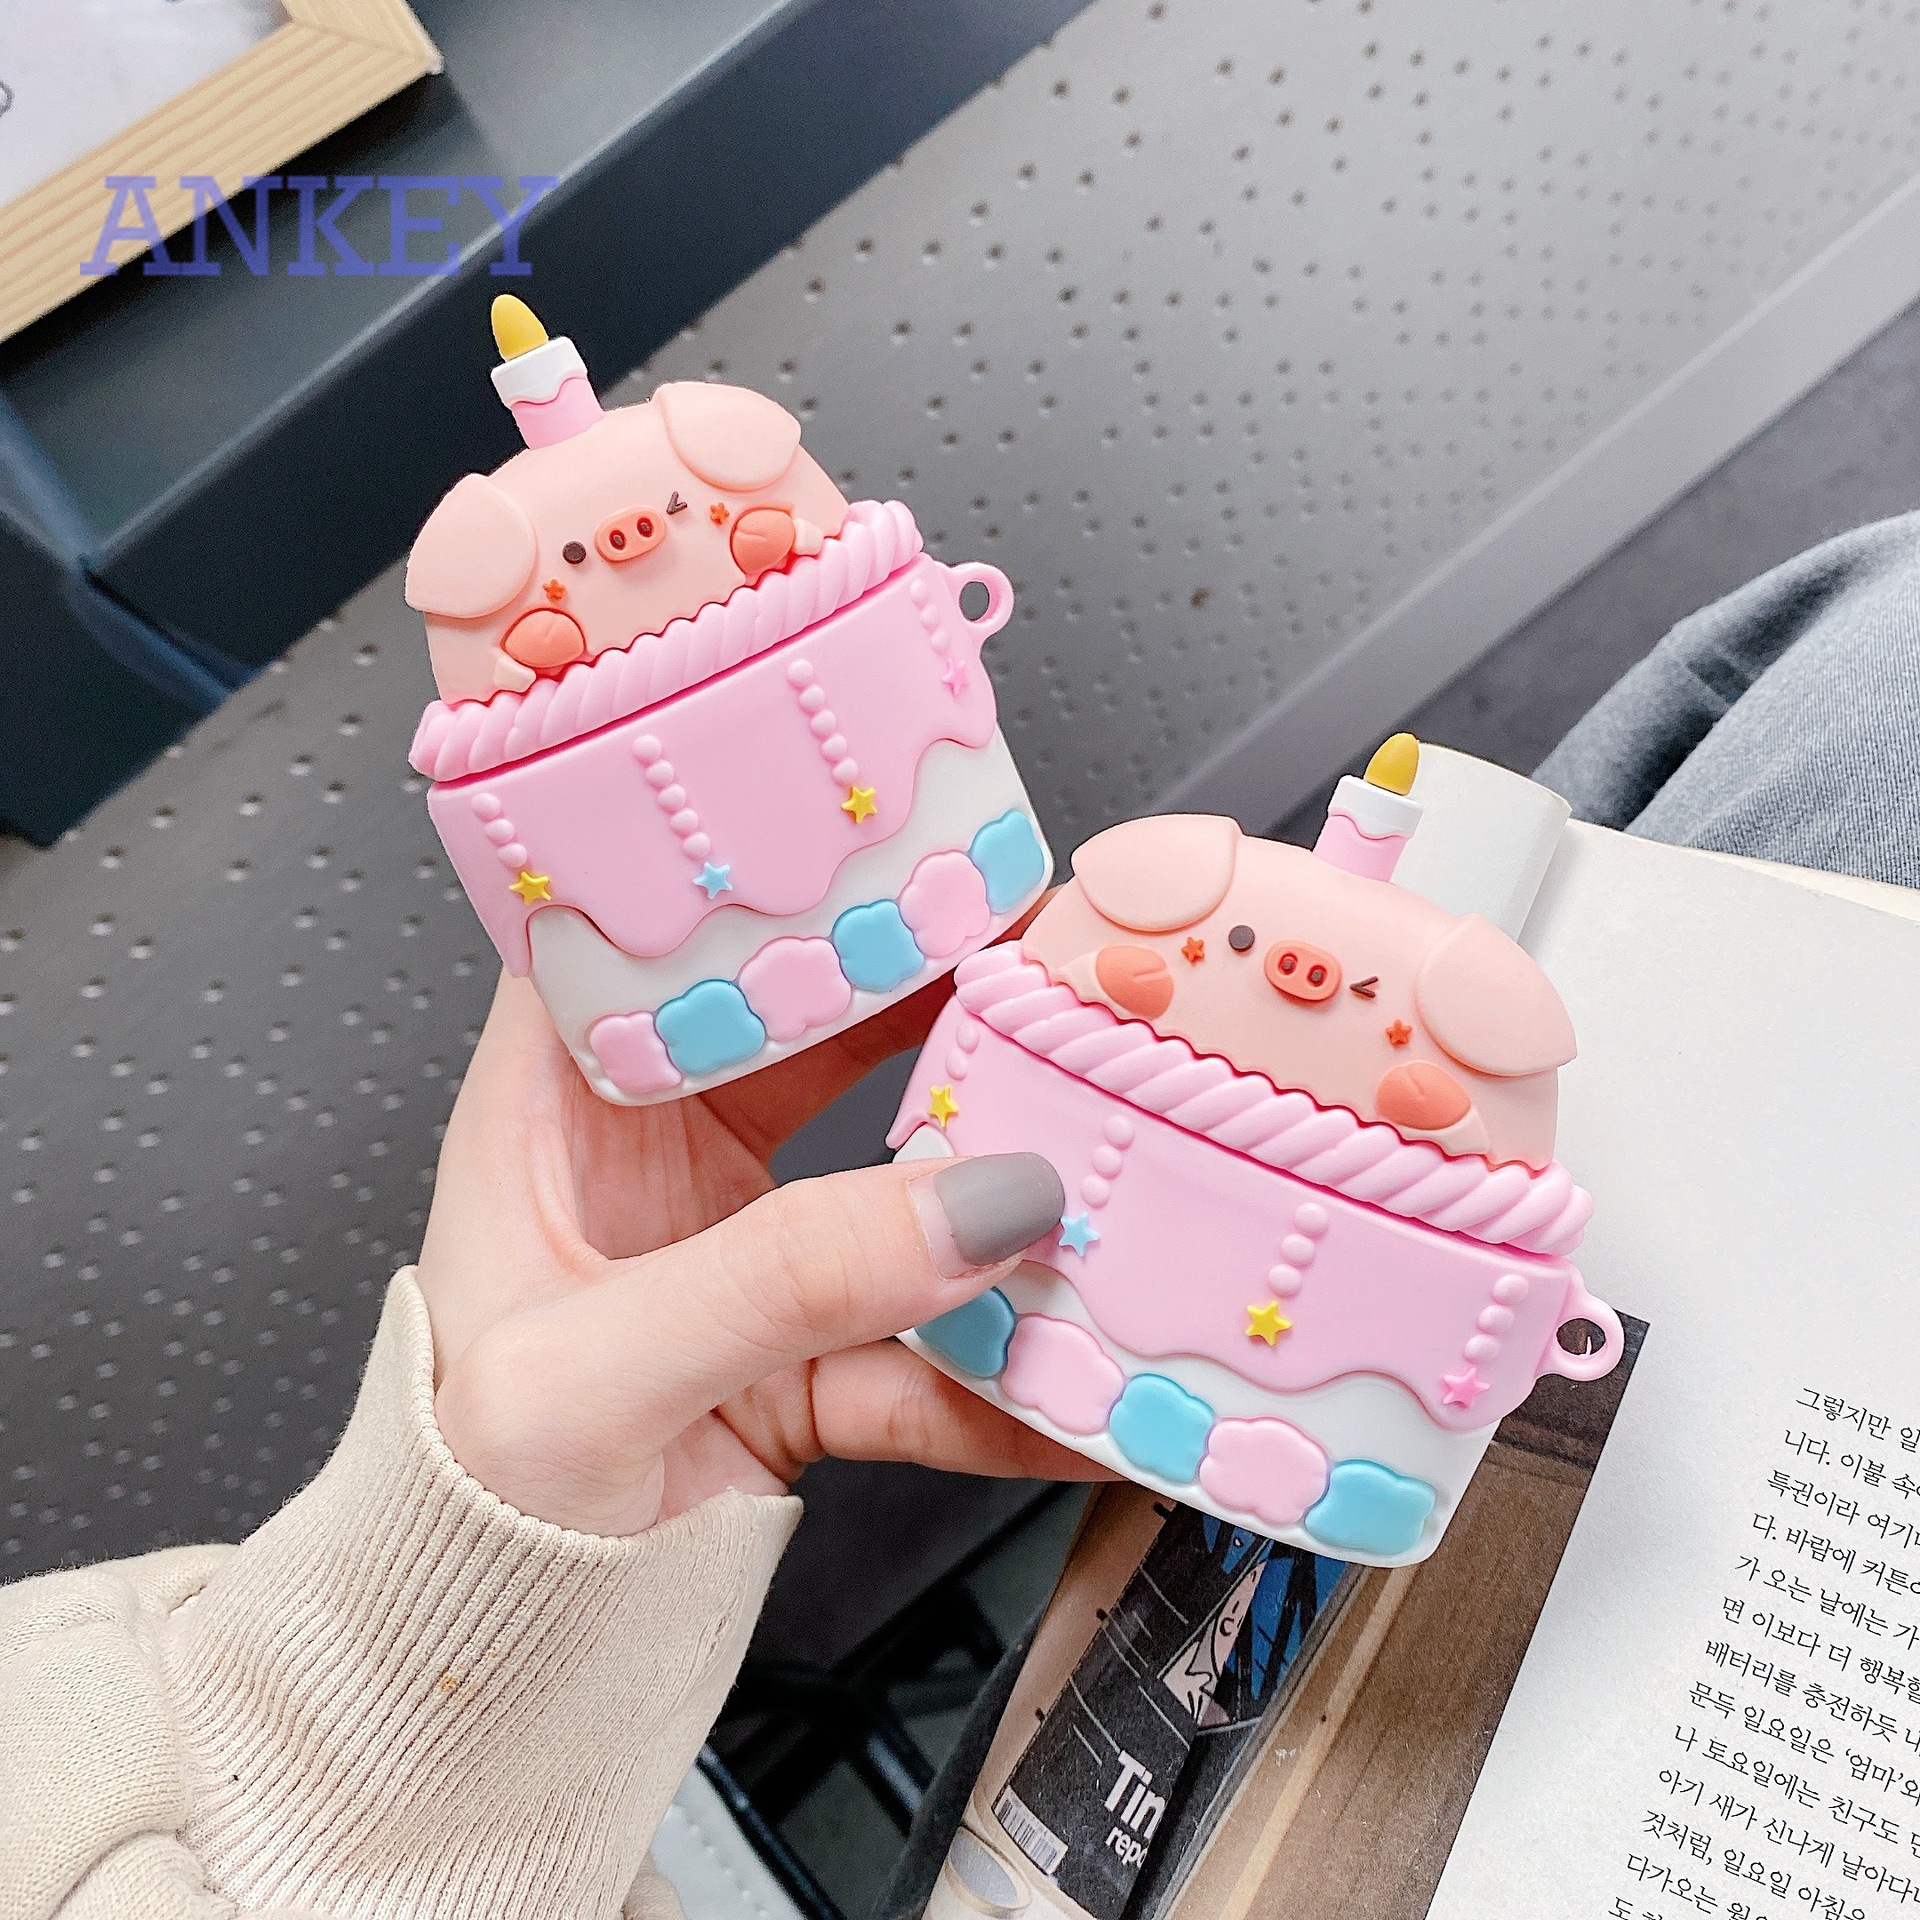 Silicone Case for Airpods 1 / 2 Case Huawei Freebuds 3 Headset Airpods Pro Case Cartoon Cake Pig Doll Wireless Cover for Airpods pro / EDIFIER / vivo neo / Xiaomi Air 2 / 2S Waterproof Shockproof Shell Soft Protective Case Headphone Cover Headset Skin